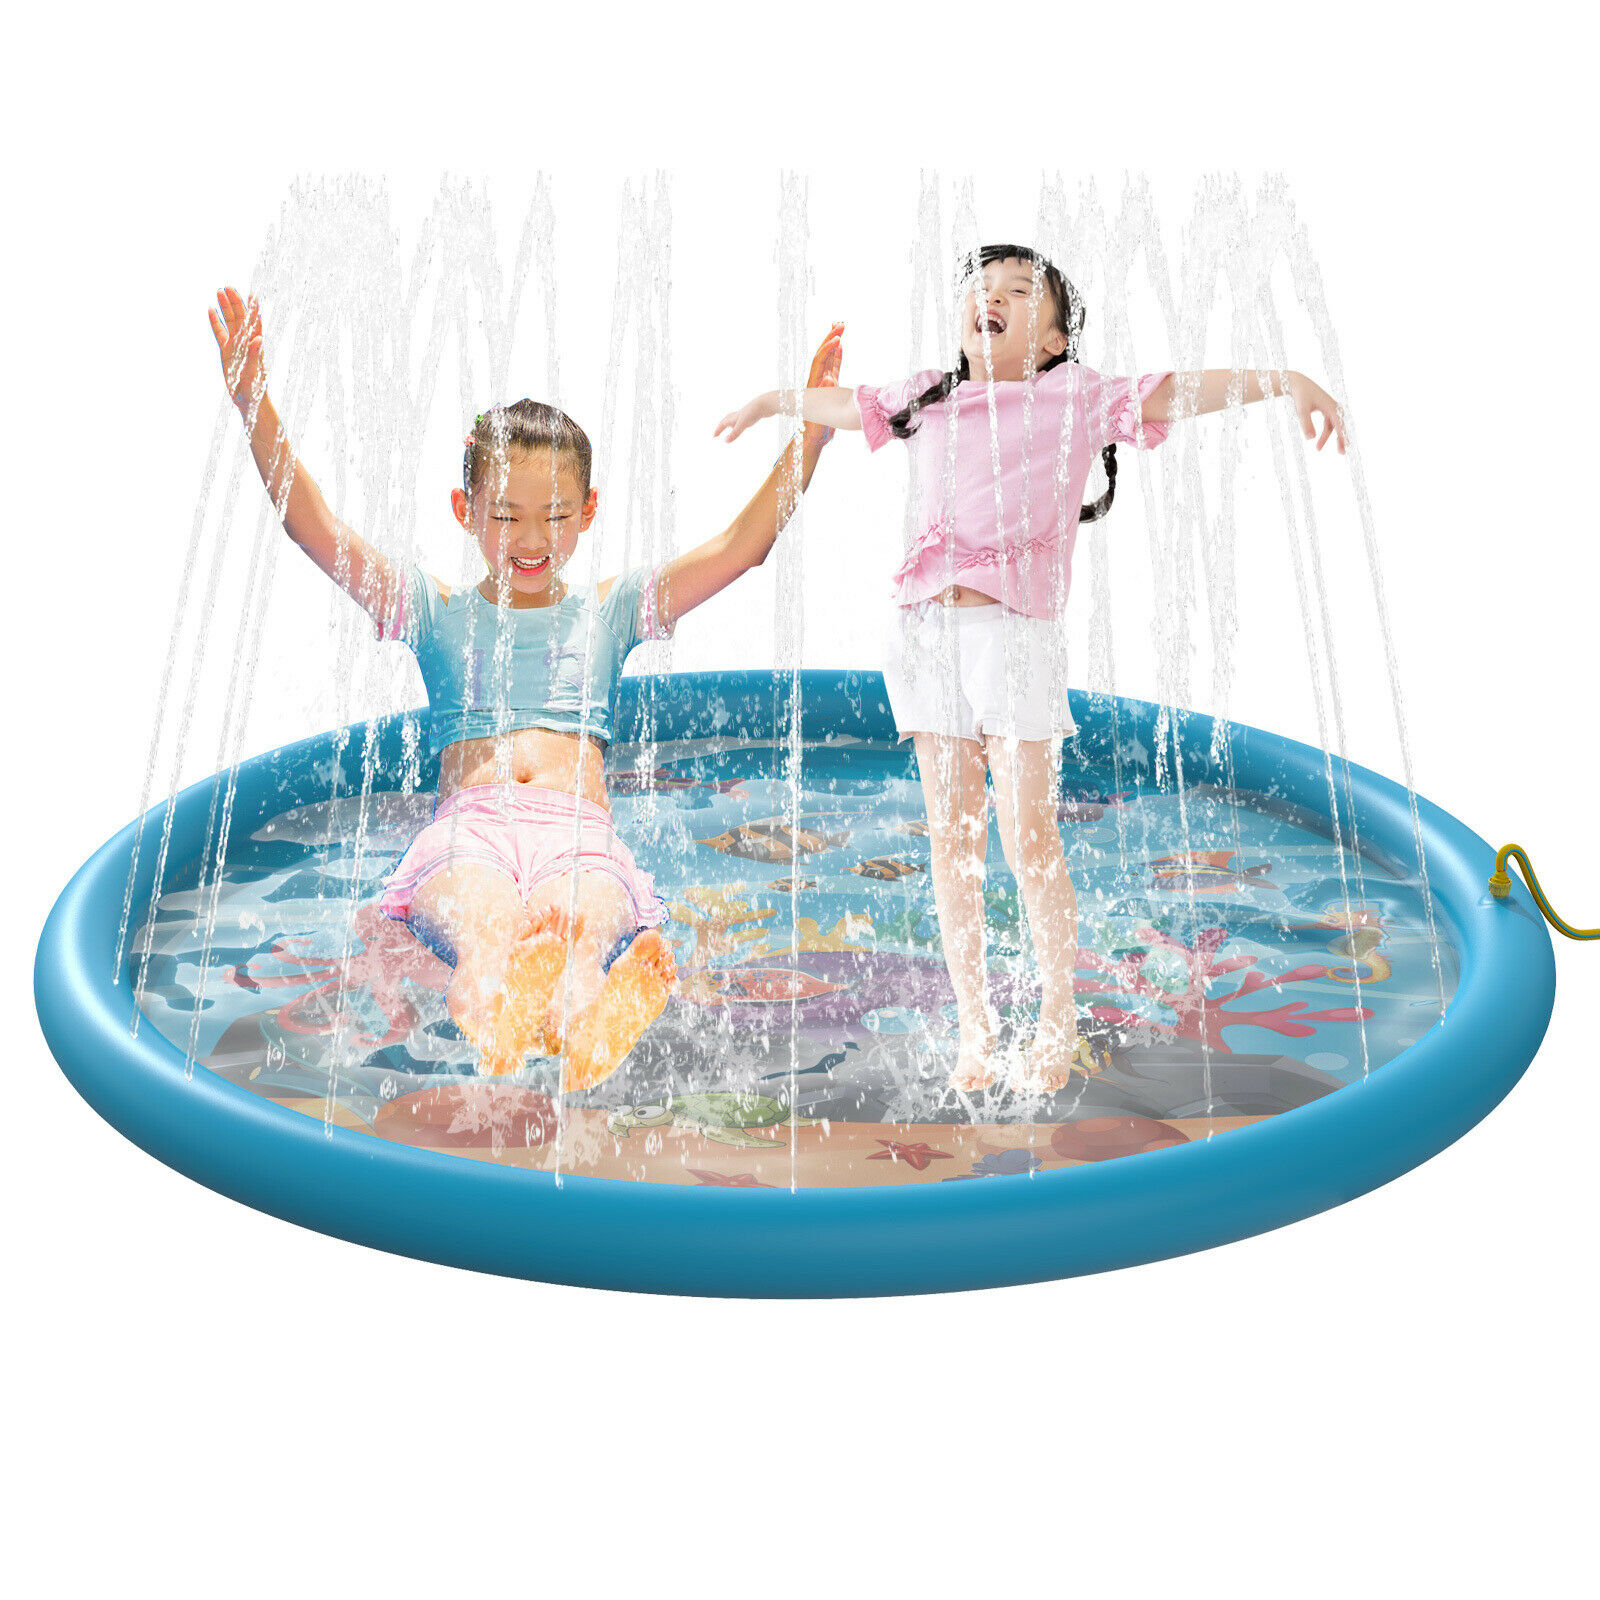 Splash Pad Sprinkler Mat Water Pool Inflatable Outdoor Play Toys for Kids Dogs